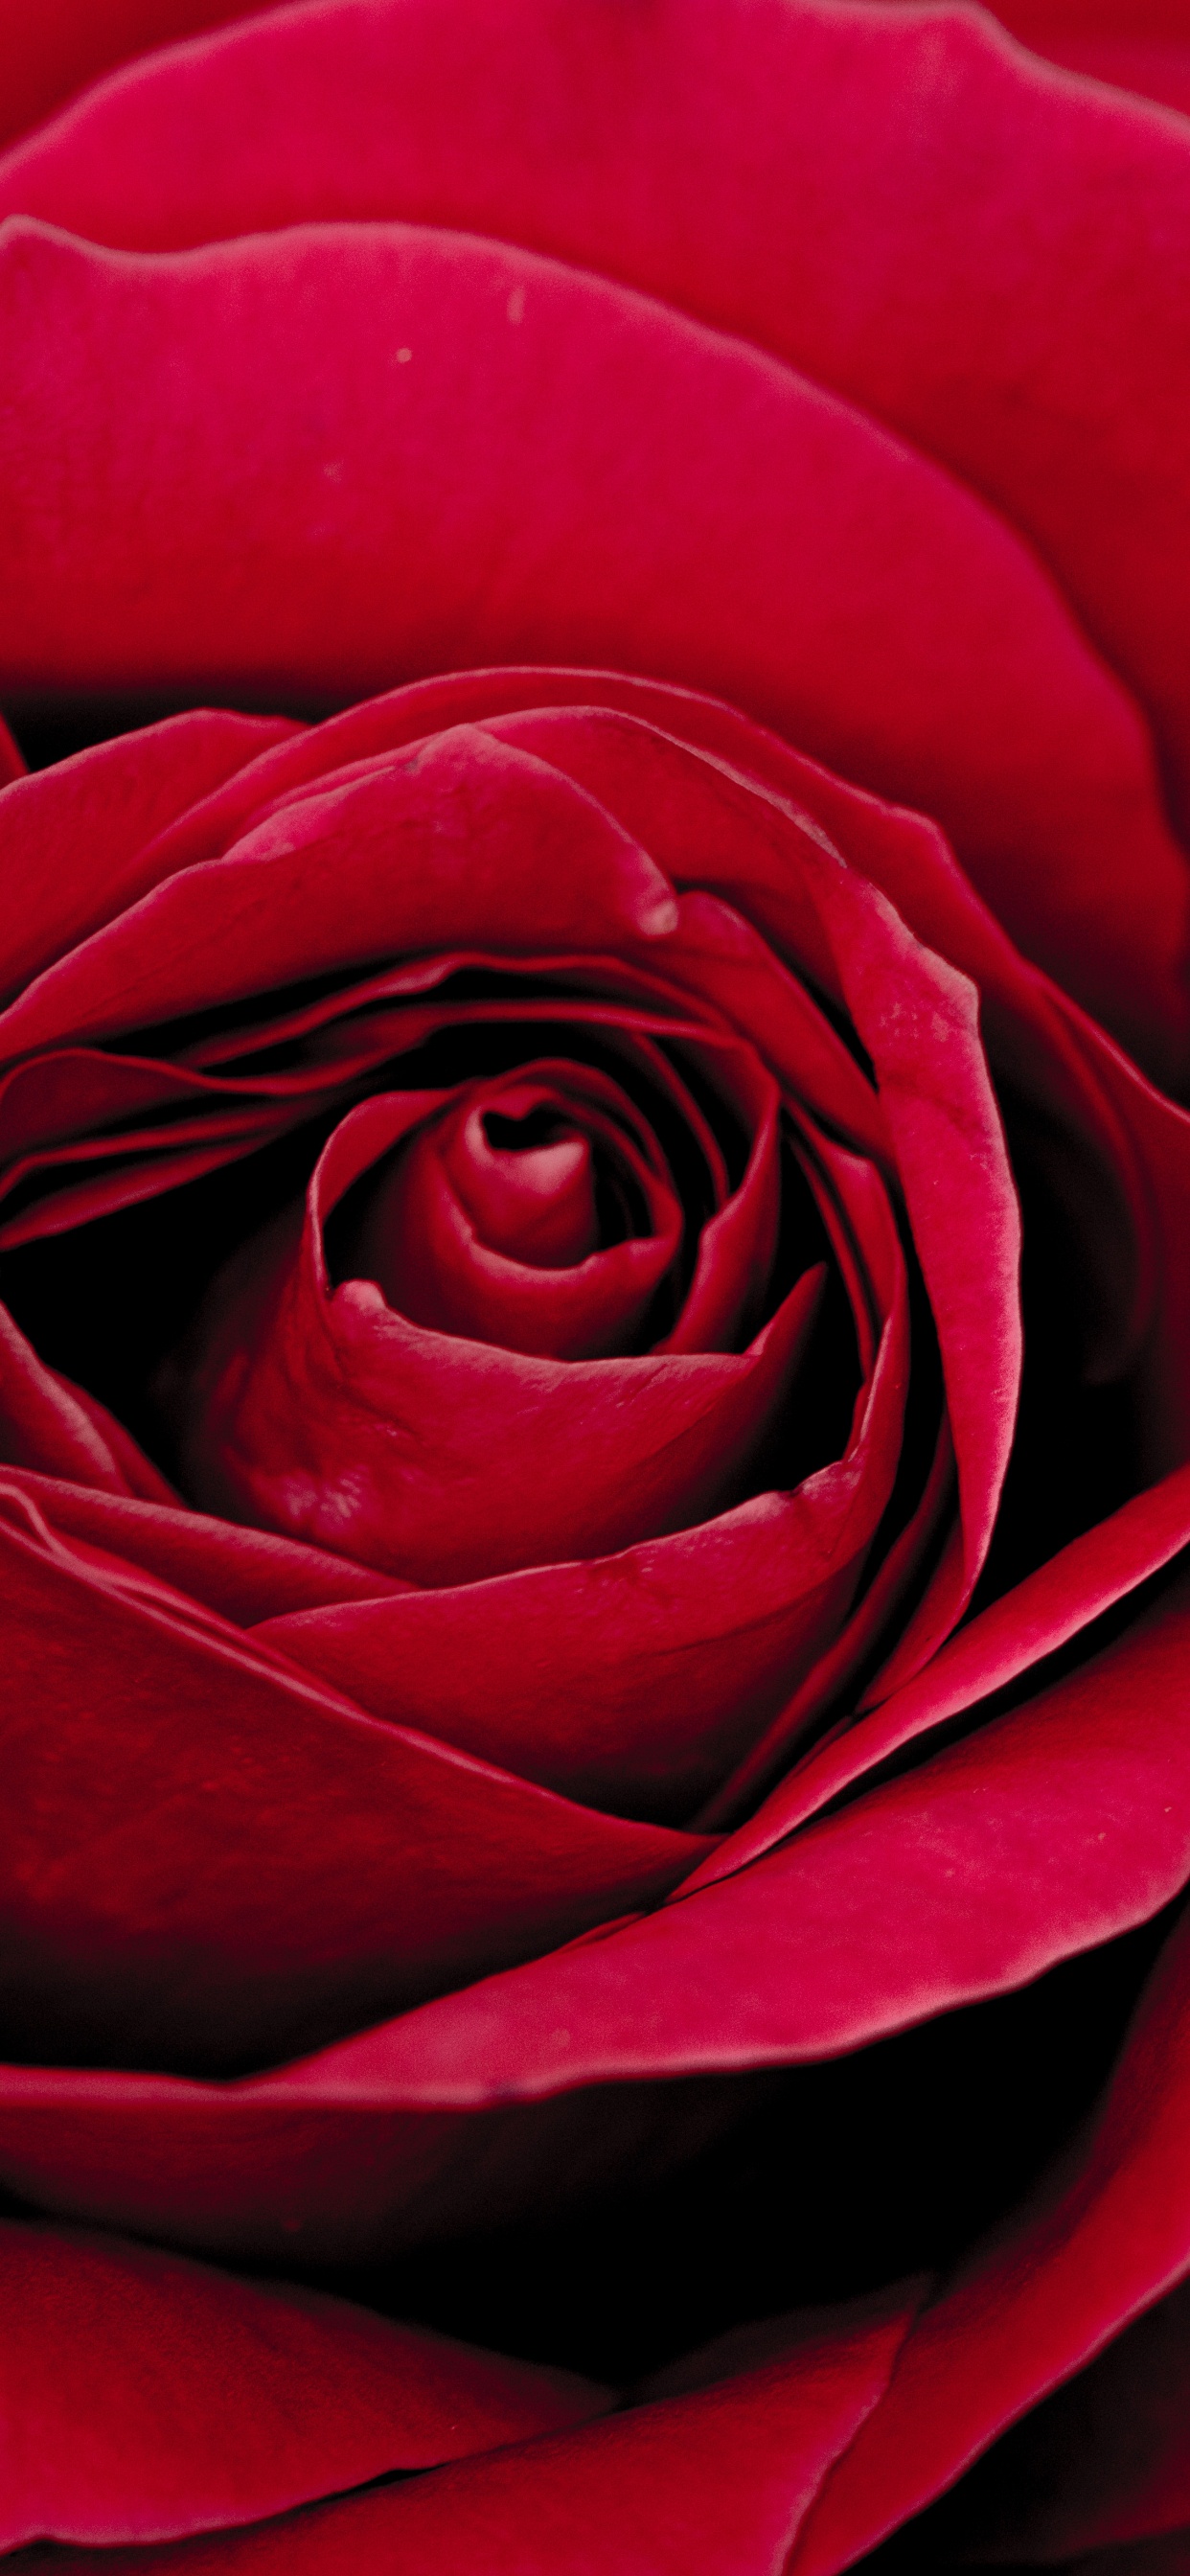 Red Rose in Bloom Close up Photo. Wallpaper in 1242x2688 Resolution